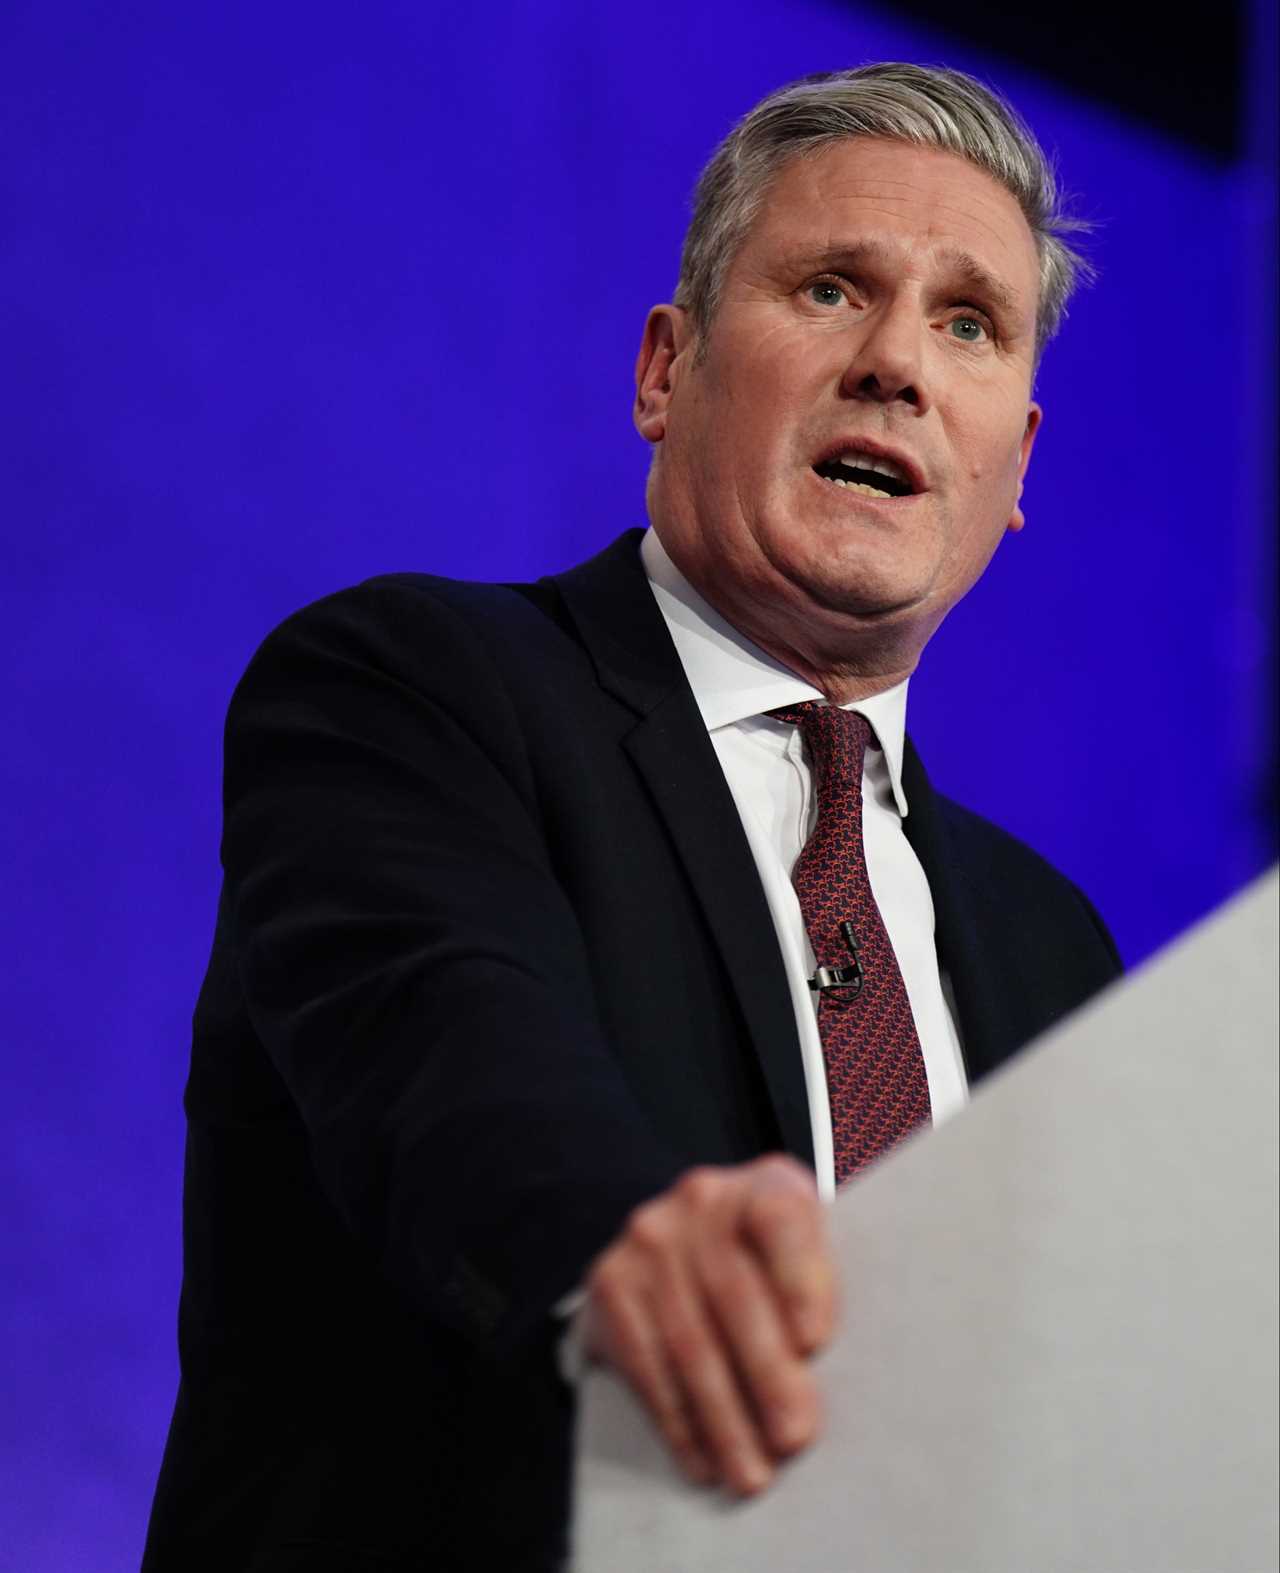 Keir Starmer boasts he’ll reopen Brexit talks if he becomes Britain’s next Prime Minister